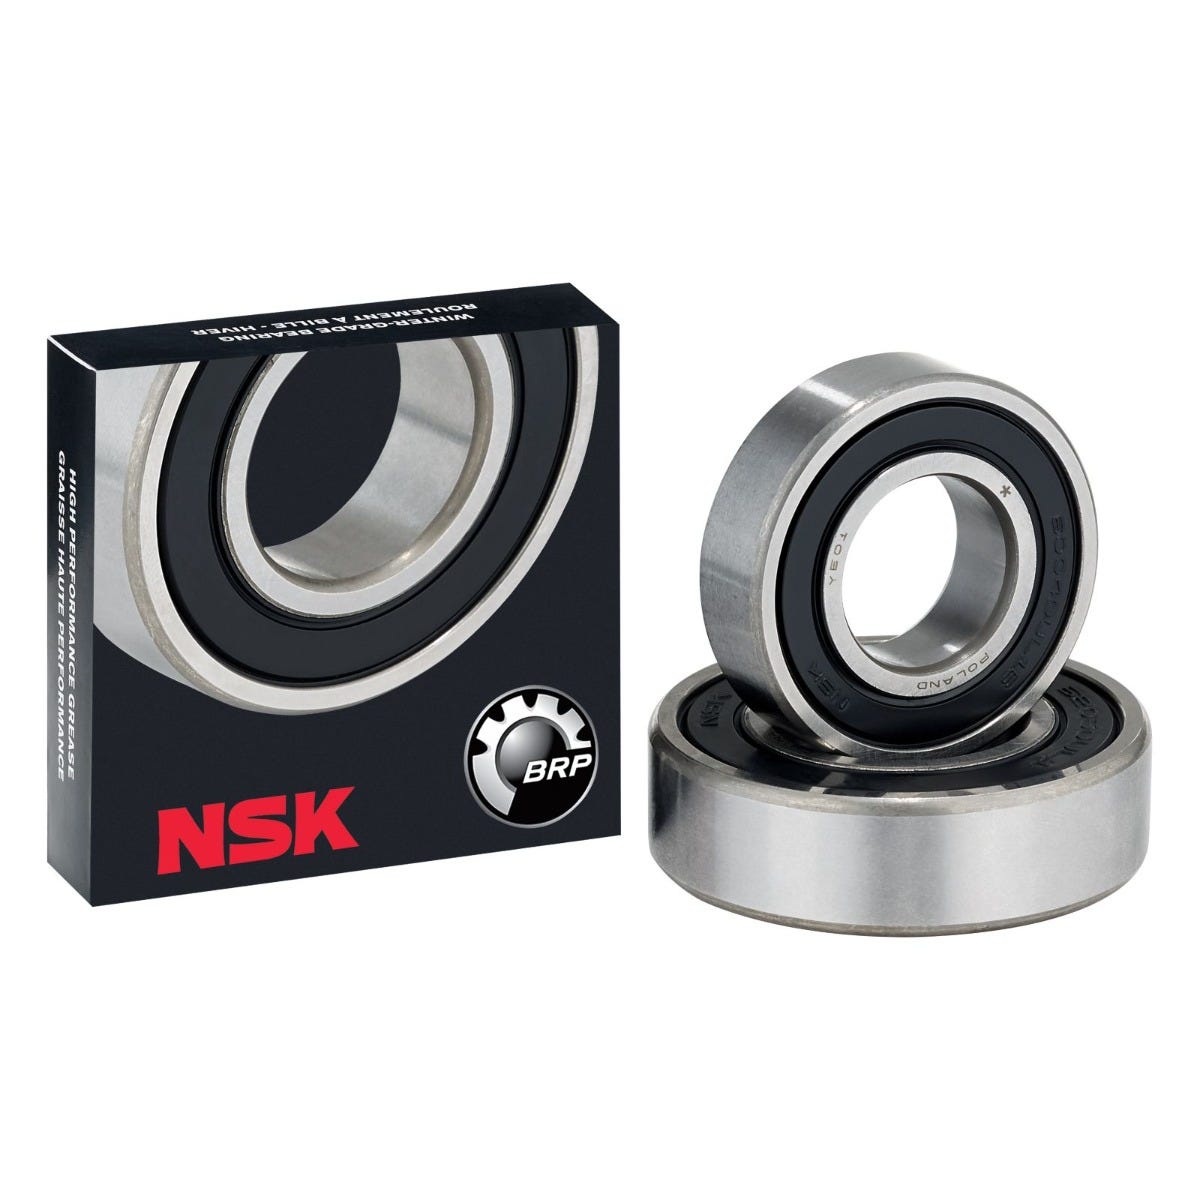 Nsk 6004 - 503190396 - The Parts Lodge